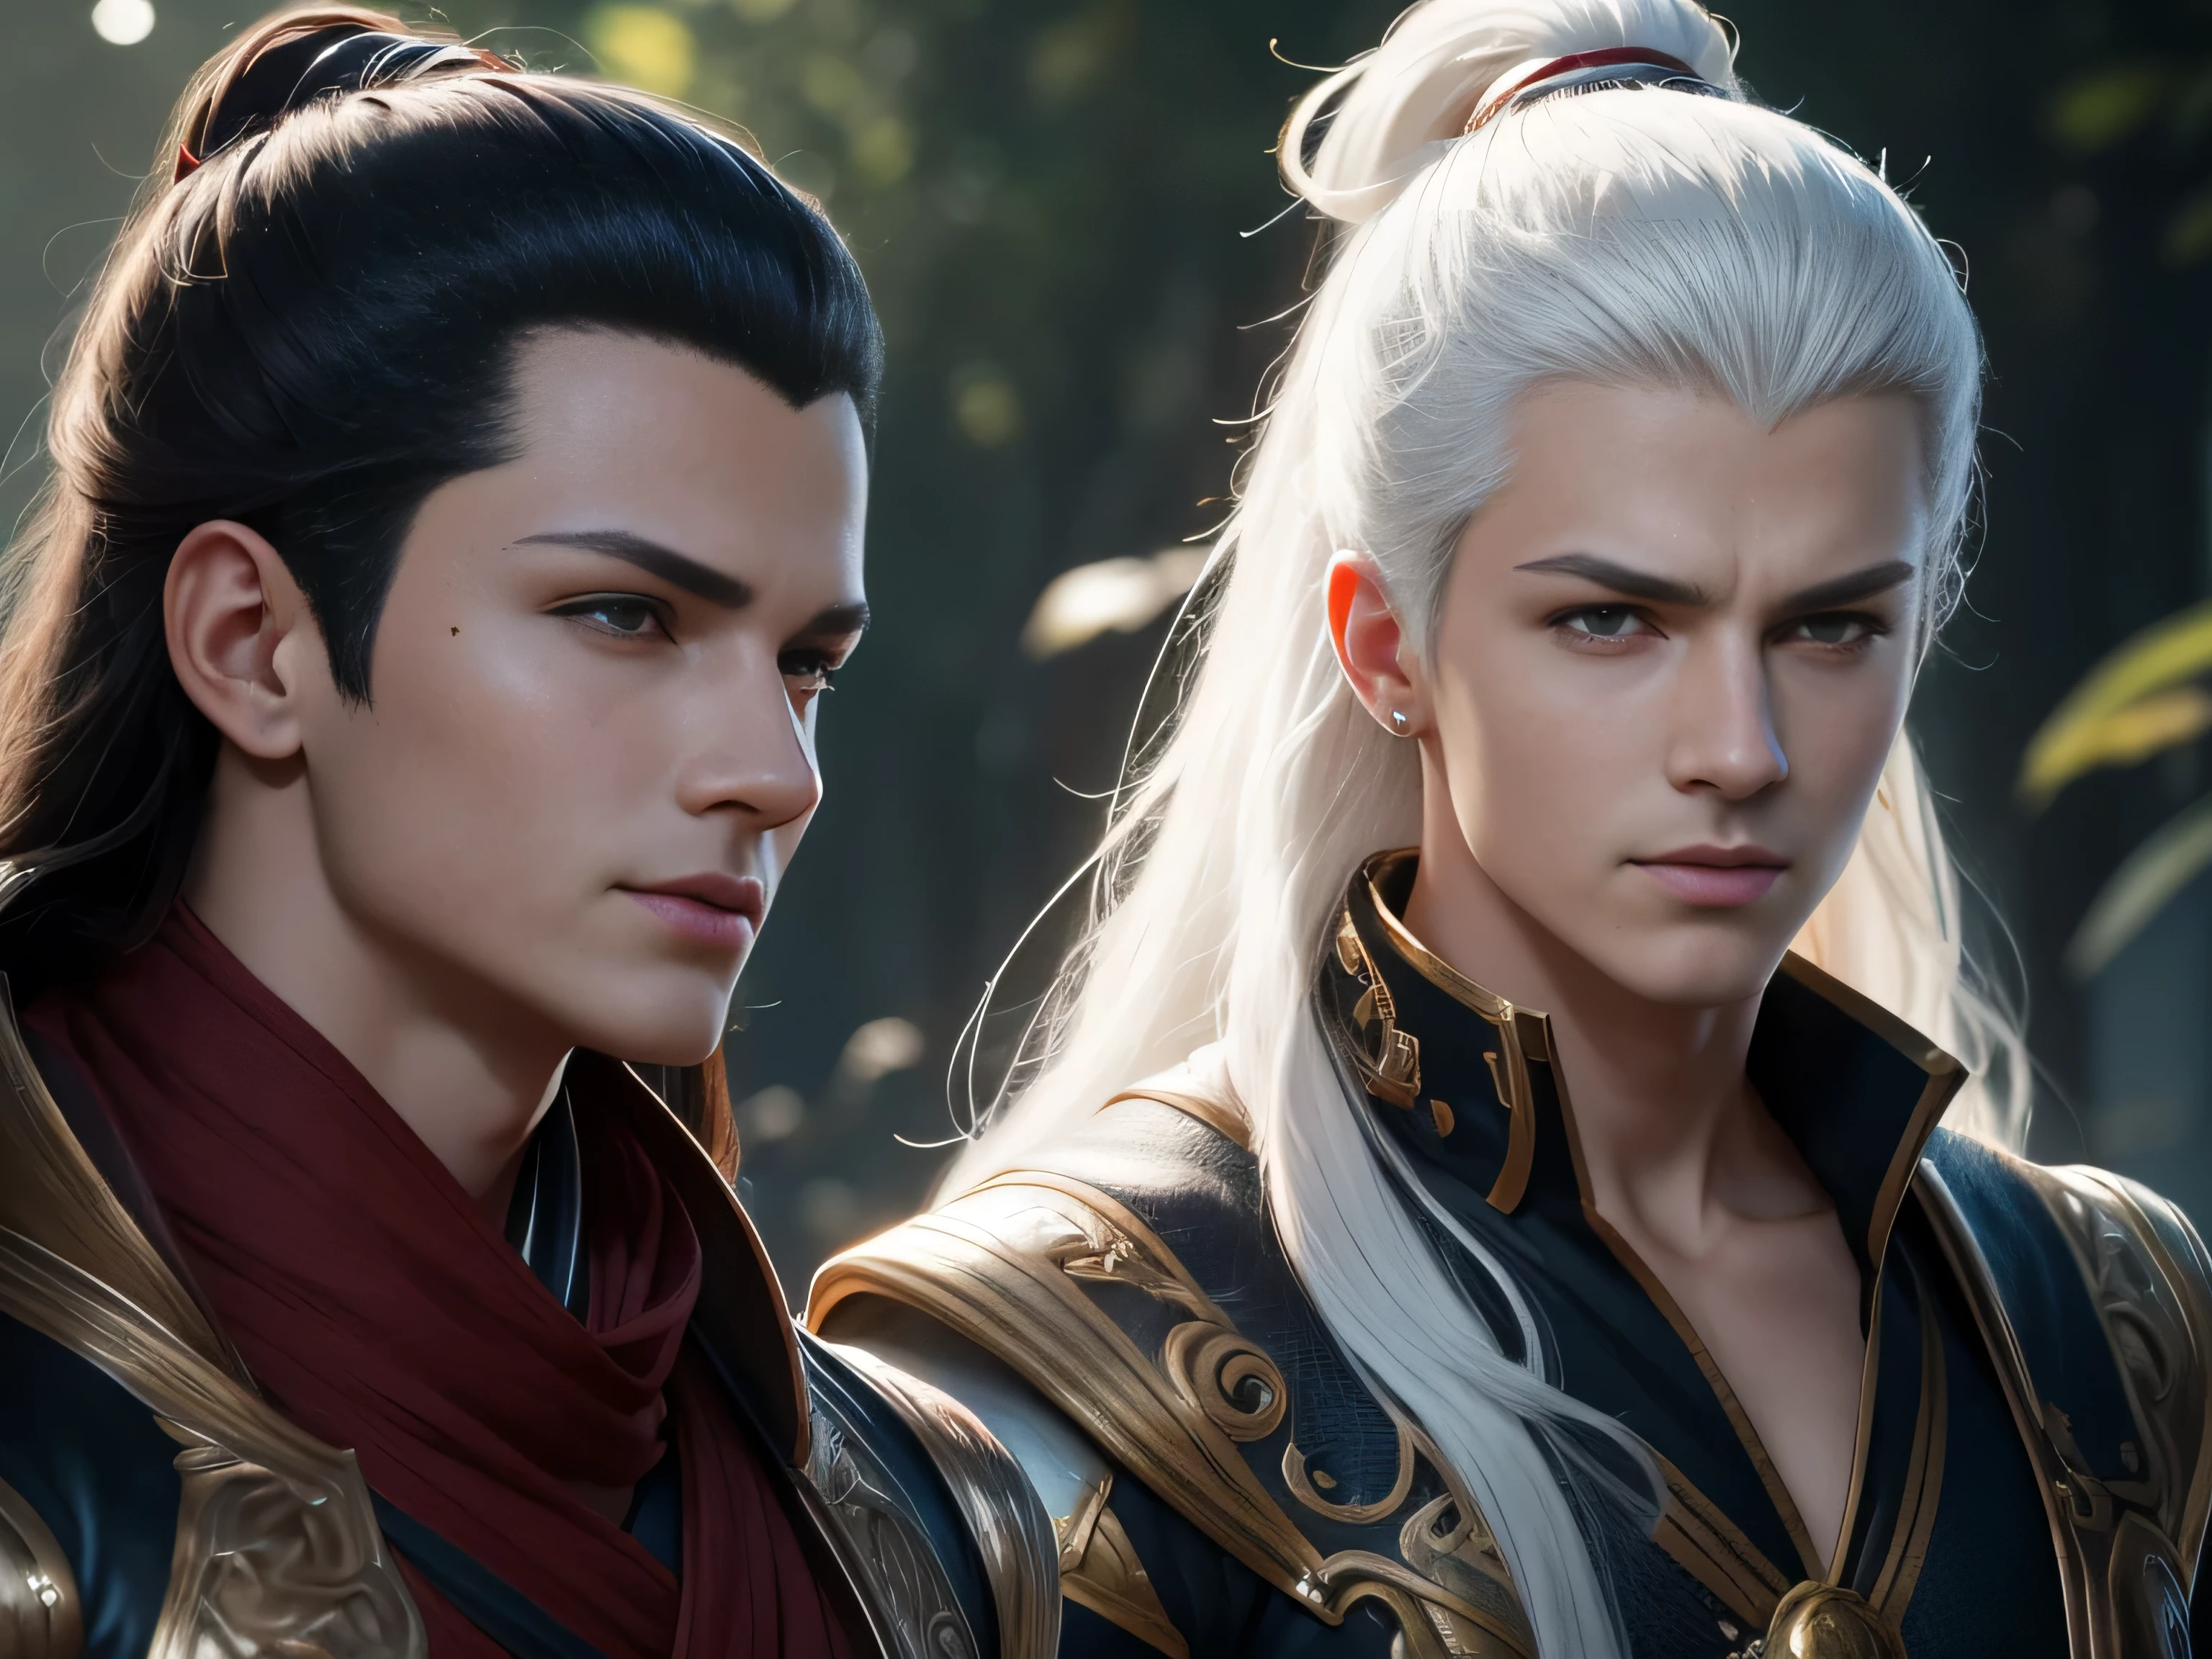 (Best Quality, 8K, Masterpiece, HDR, Soft Lighting, Picture Perfect, Realistic, Vivid), Male Humanoid Dragon (1.0), 1 Guy, Perfect Face, Super Detailed Photo of a Gorgeous Humanoid Dragon Man with Long White Hair, Side by Side lies a white dragon, Beautiful anime fantasy, background blur, anime fantasy, work in the style of Gouves, realism: 1.37, long white hair, plump lips, (Ultra high quality fantasy art), Masterpiece, male model, male character ultra high quality designs, detailed 8k anime art, realistic anime art, highest quality wallpapers, intricate ultra high quality accurate male characters faces, high quality designs and accurate physics (fantasy - ultra high quality art), dark fantasy style), masterpieces, super high quality quality characters, anime resolution - 8K, realistic anime art, wallpapers with the highest quality illustrations, ultra-high detail faces, high-quality design and accurate physics), color, depth of field, shadows, ray tracing, high-quality execution. -high quality and 8K resolution, (Accurate simulation of the interaction of light and materials)], [High-quality hair detail [Read more about beautiful and shiny white hair]], (Beautifully detailed hands [perfect fingers [Perfect nails]]], (perfect anatomy ( perfect proportions)))) [[Full-length]], [Perfect combination of colors (Accurate imitation of the interaction of light and material)], [art that conveys the meaning of the story](modified)